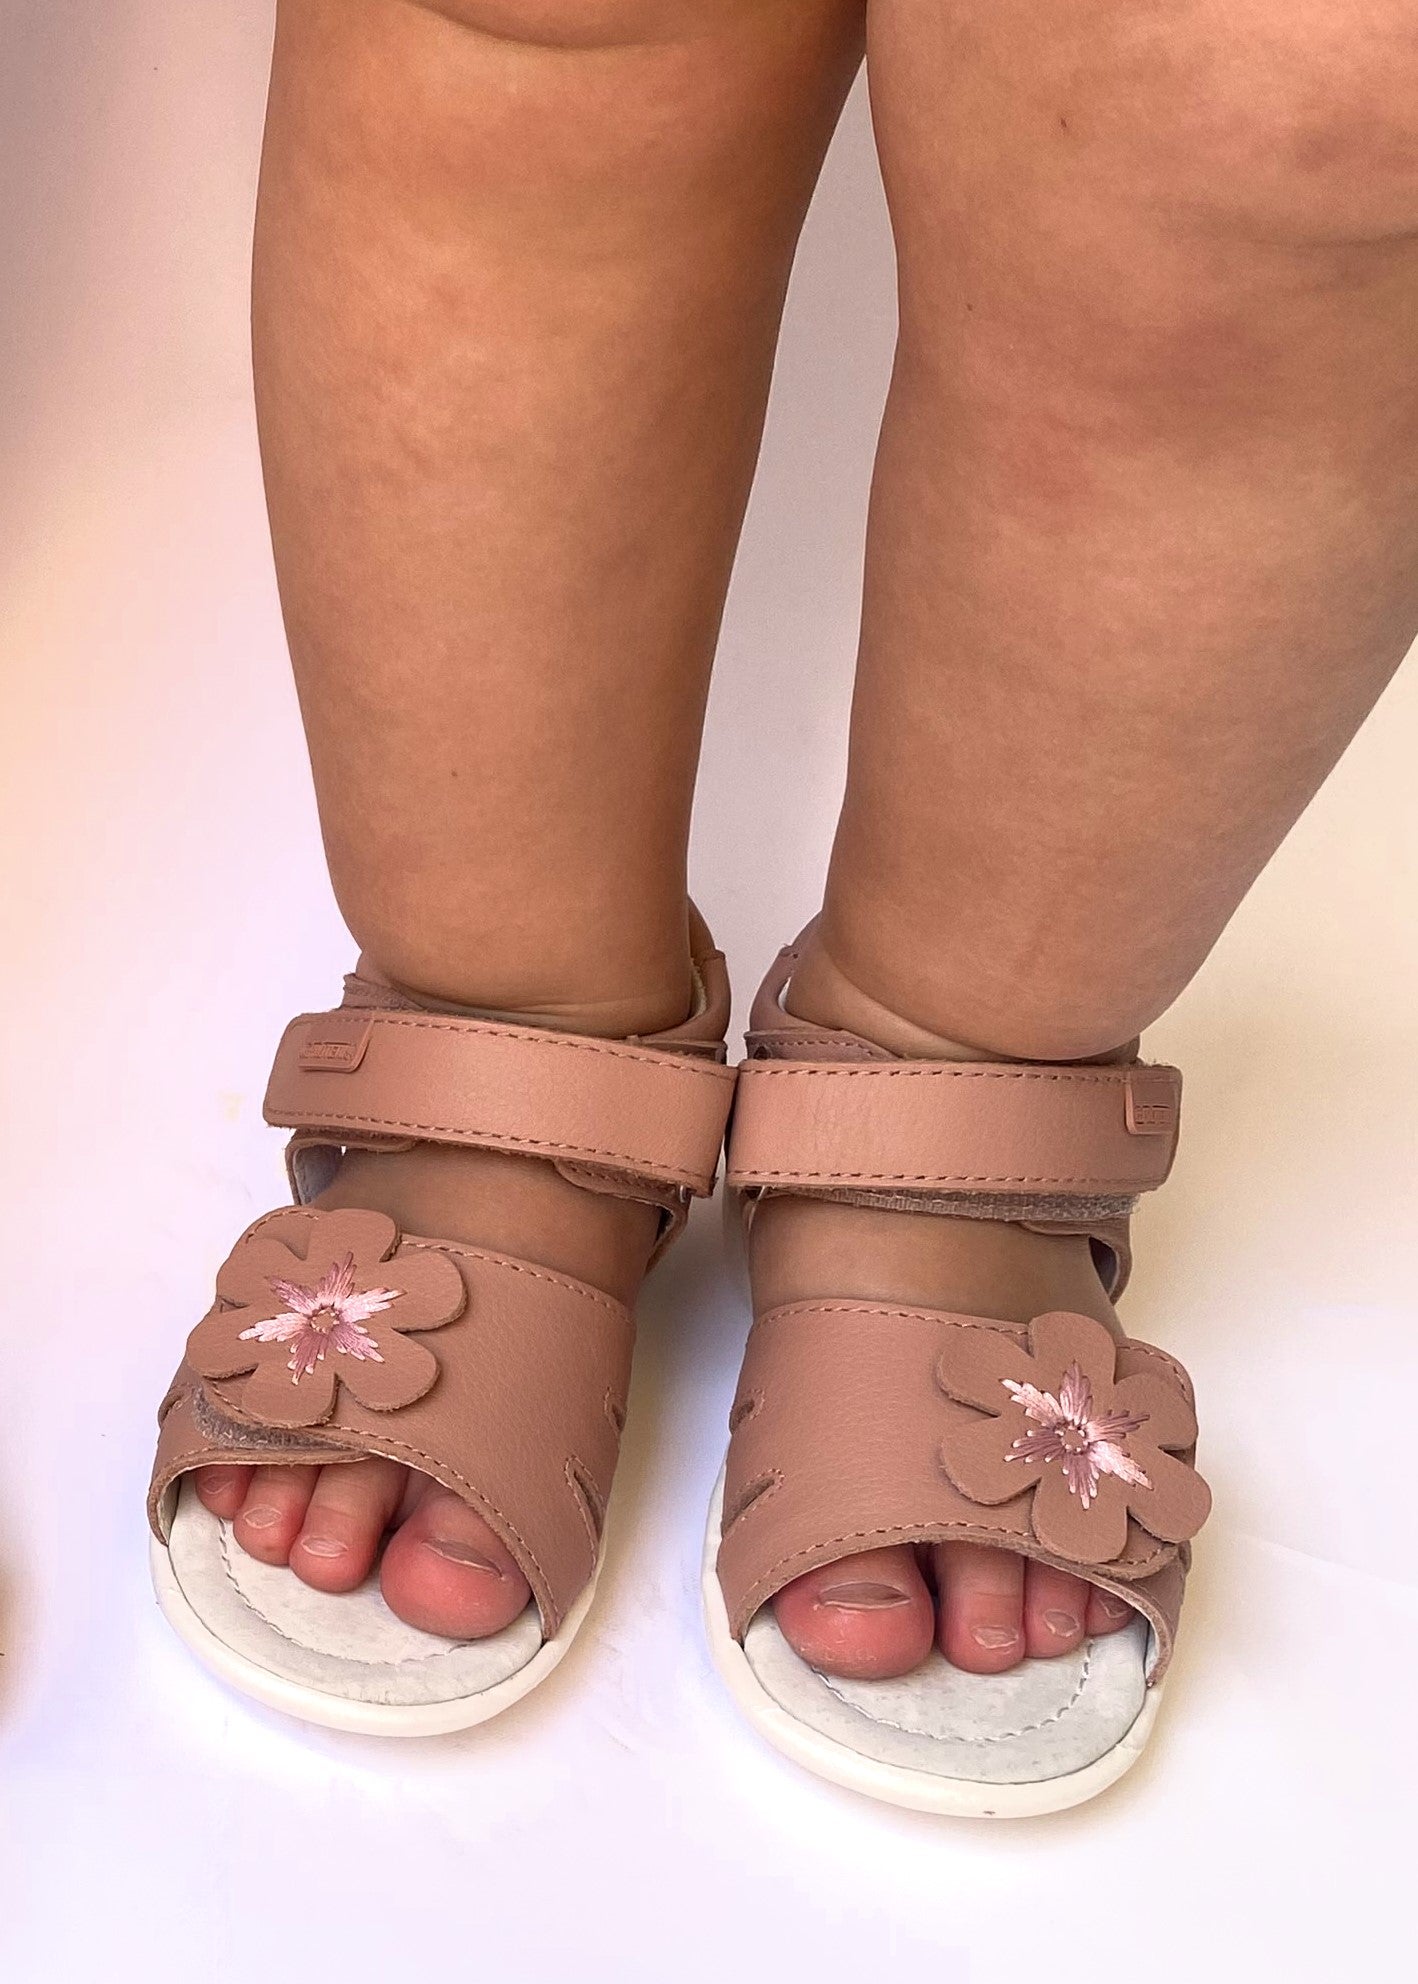 PRIA pink is an arch supporting sandal for toddler girls, in a beautiful peachy pink neutral colour and a beautiful decorative flower.